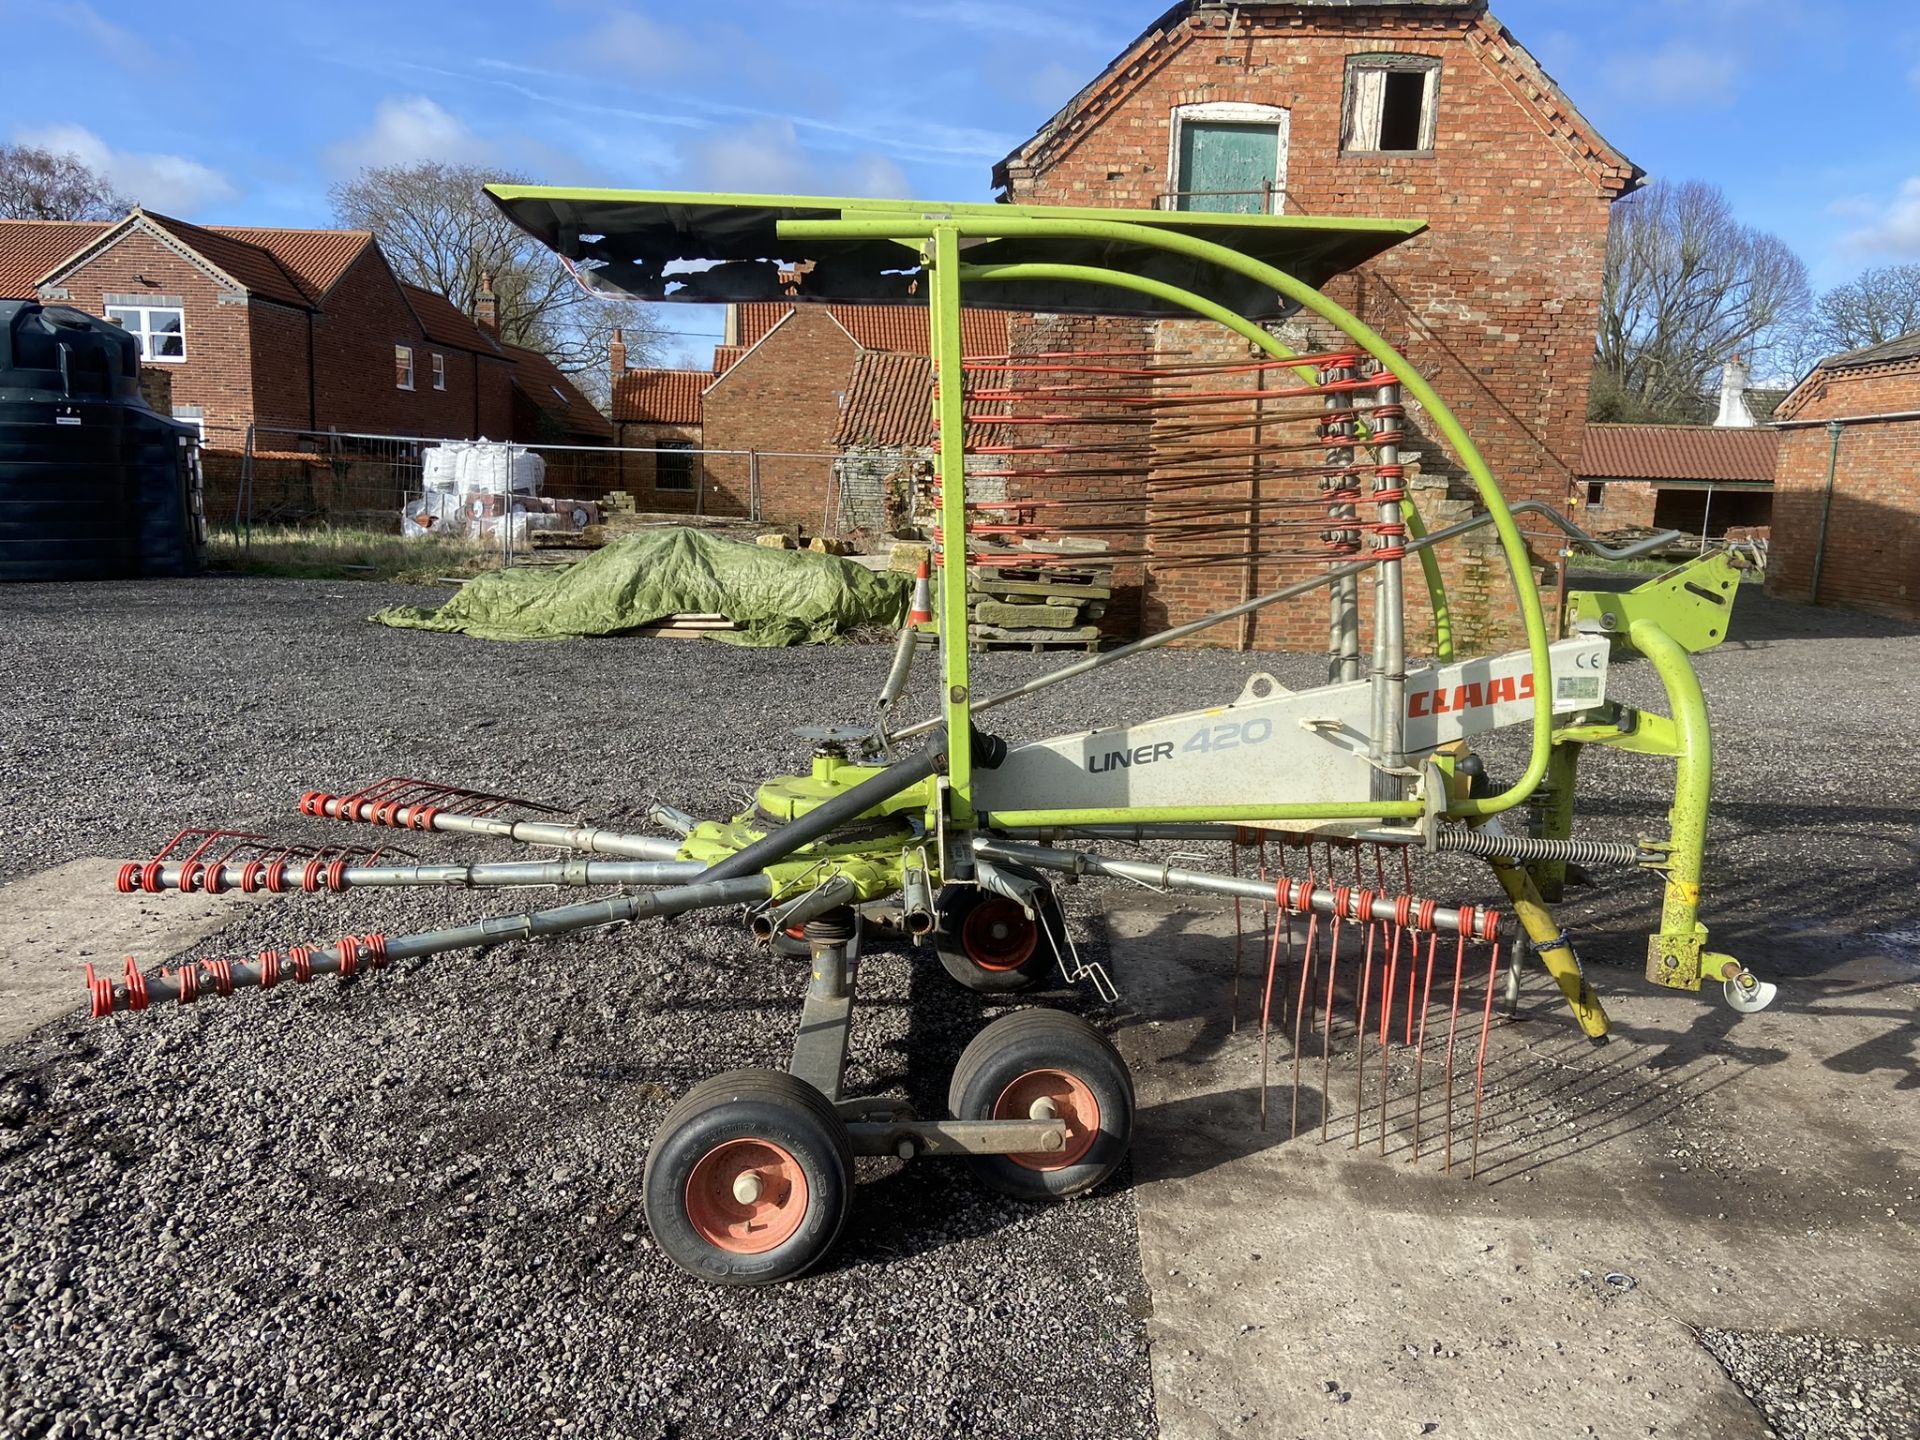 2013 Claas Liner 420 Type G11 Single Rotor Rake, S/No. G1102521, Mass Weight 650kg, 12 Tine Arms, - Image 3 of 7